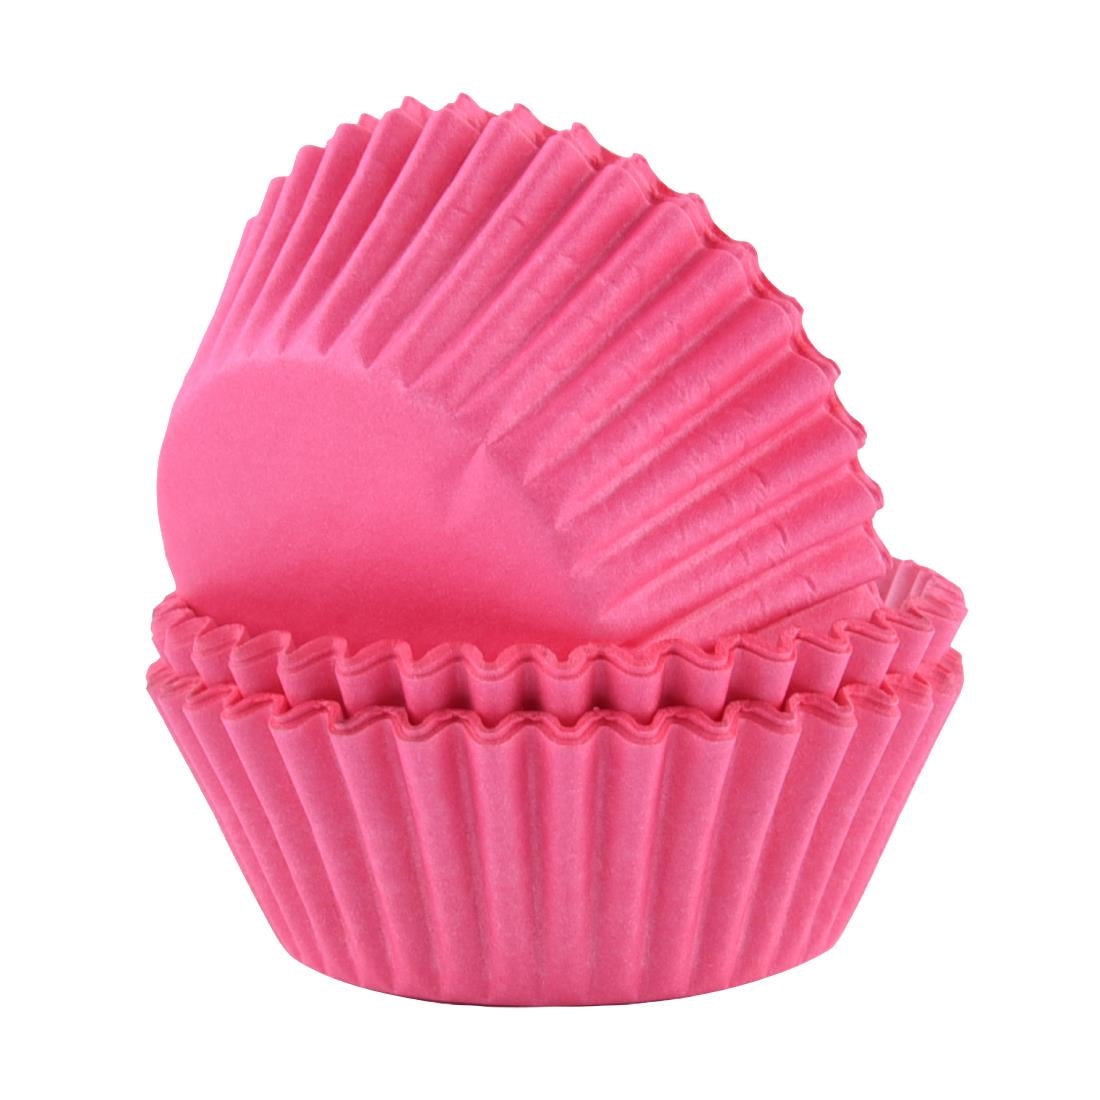 CX137 PME Block Colour Cupcake Cases Pink, Pack of 60 JD Catering Equipment Solutions Ltd